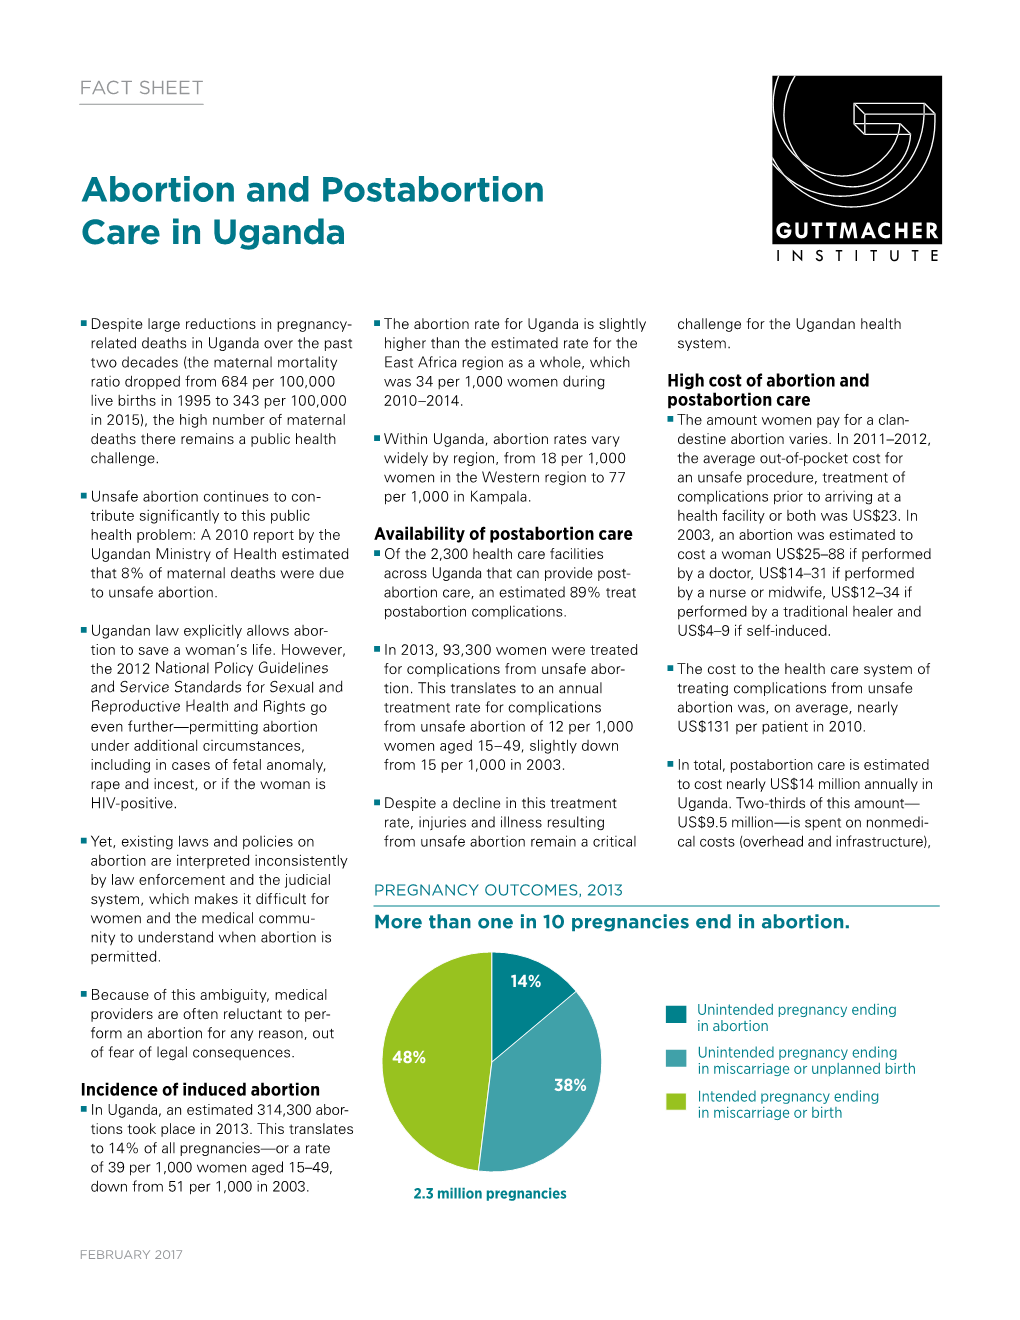 Abortion and Postabortion Care in Uganda